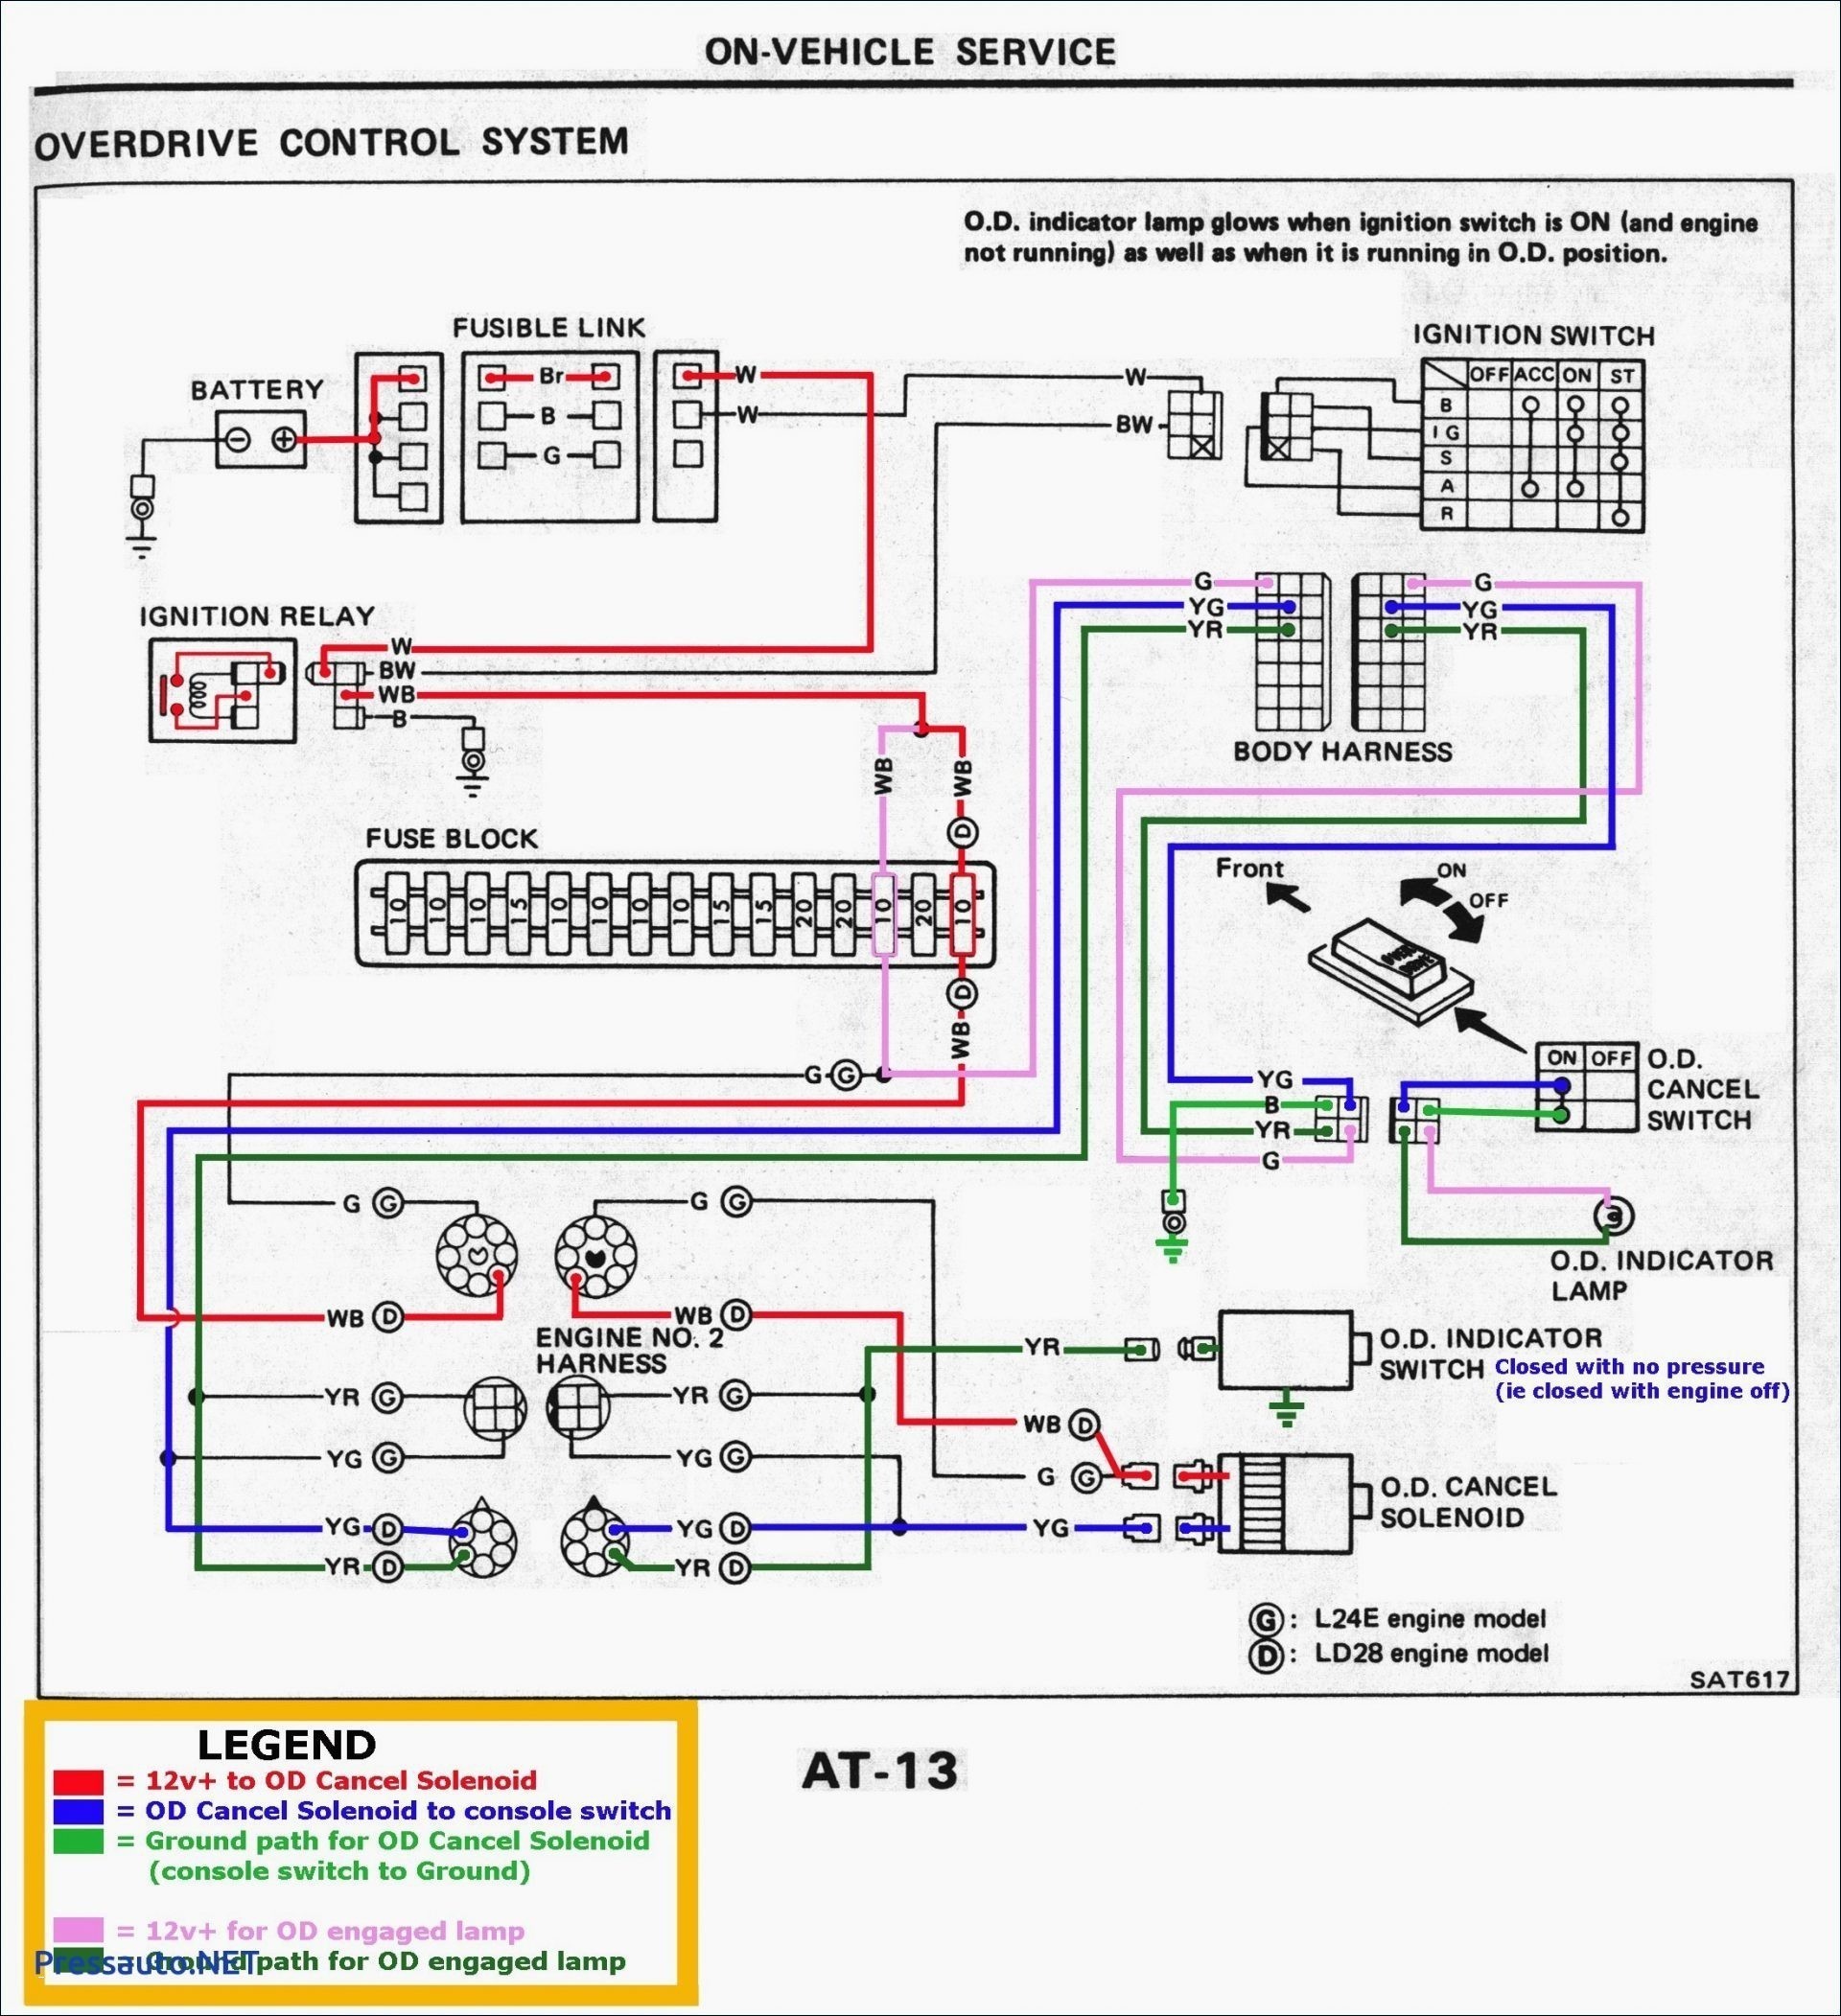 Electrical Wiring Diagram for Garage Refrence Lamp Wiring Diagram Gallery